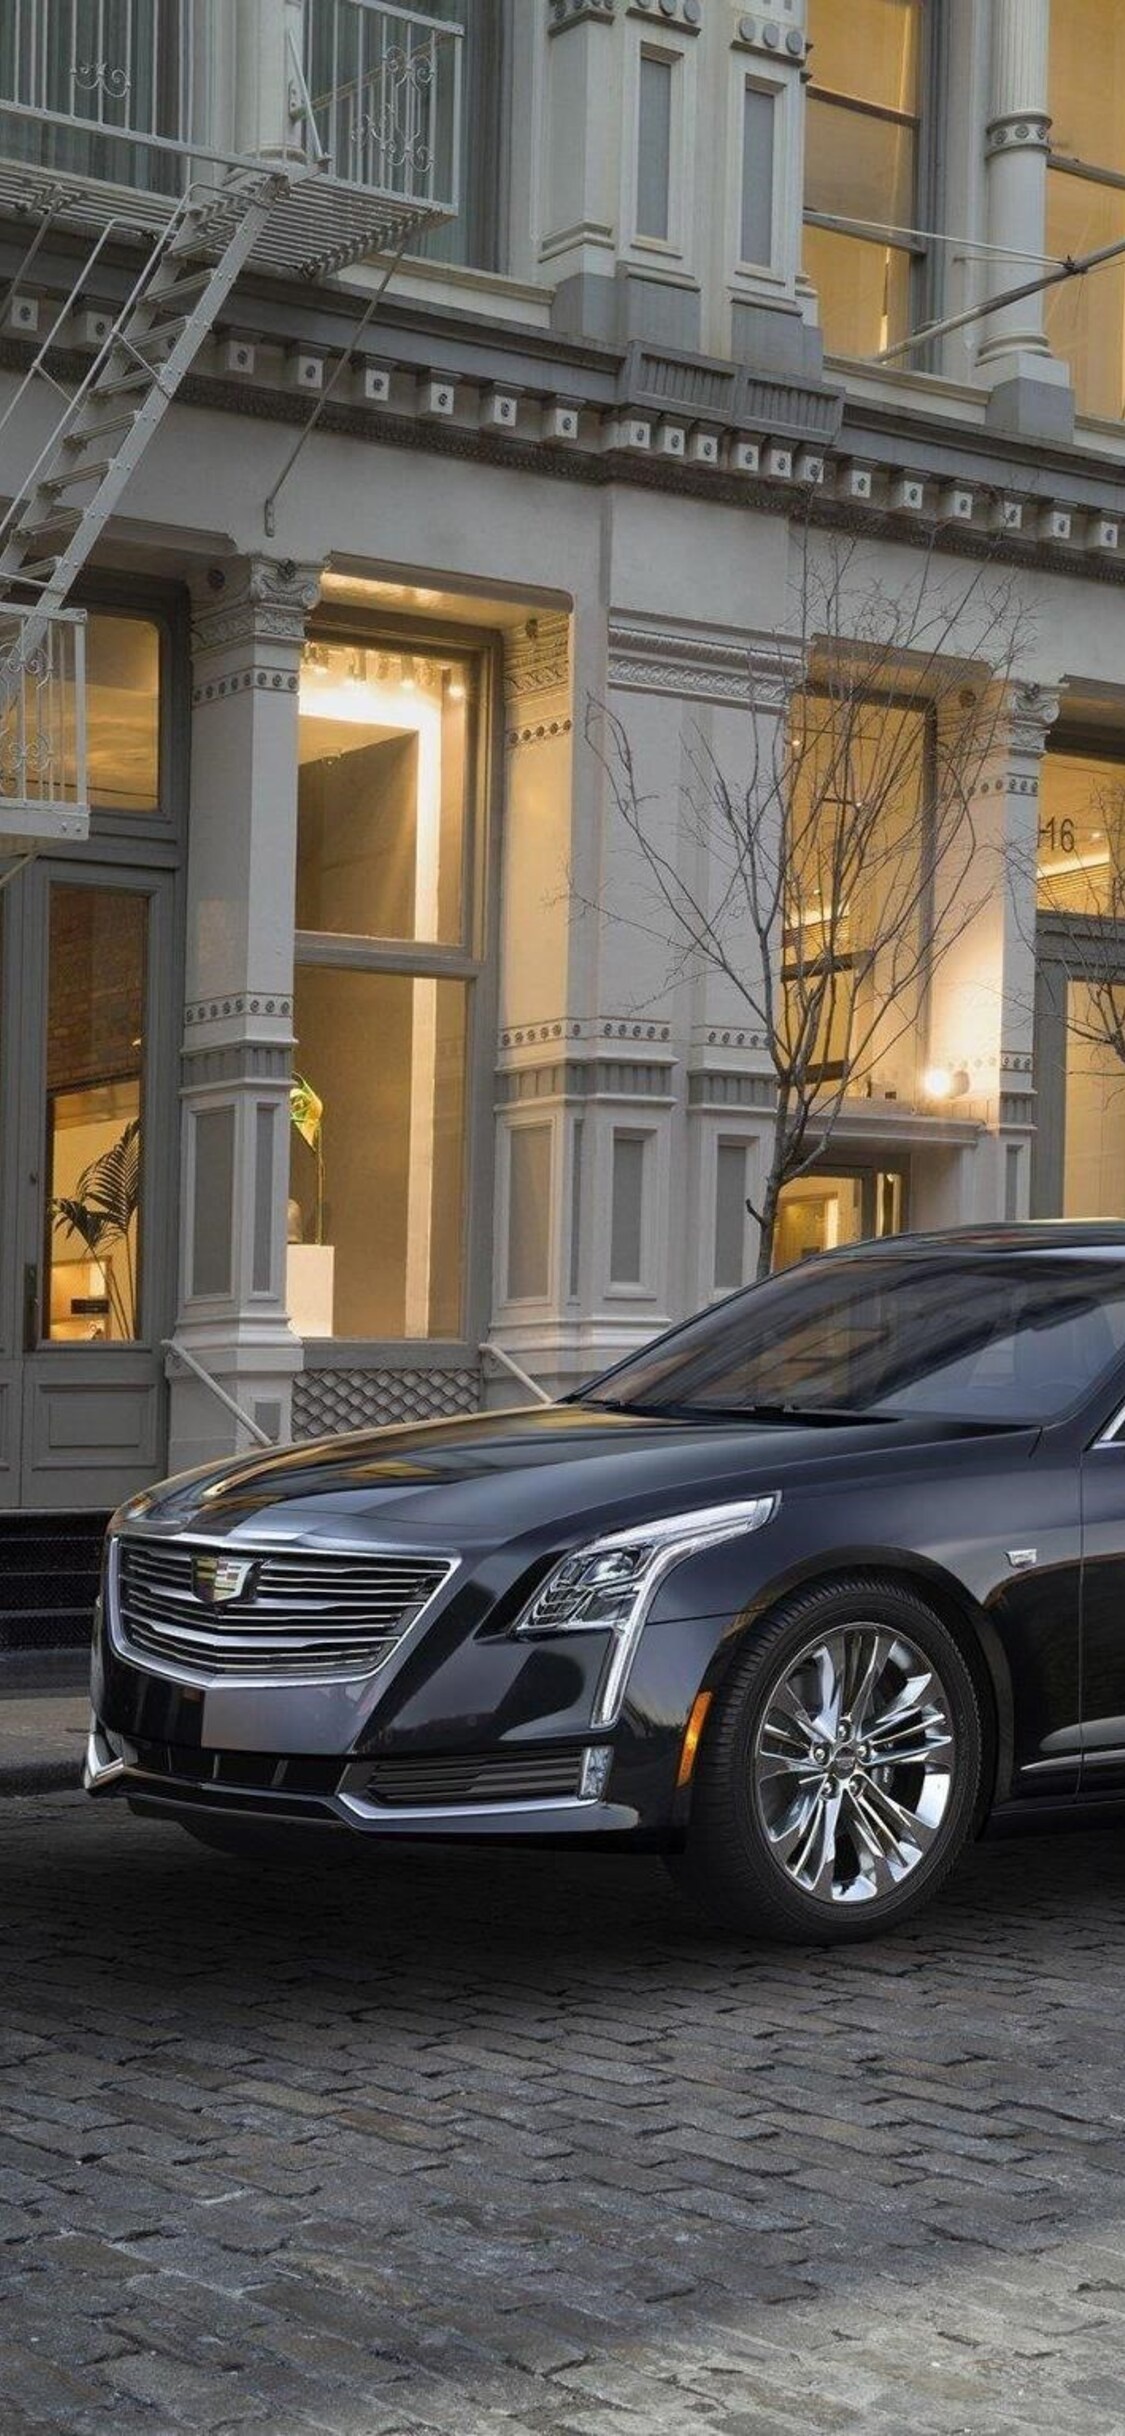 General Motors, Cadillac CT6, High-quality wallpapers, Luxury automotive, 1130x2440 HD Handy